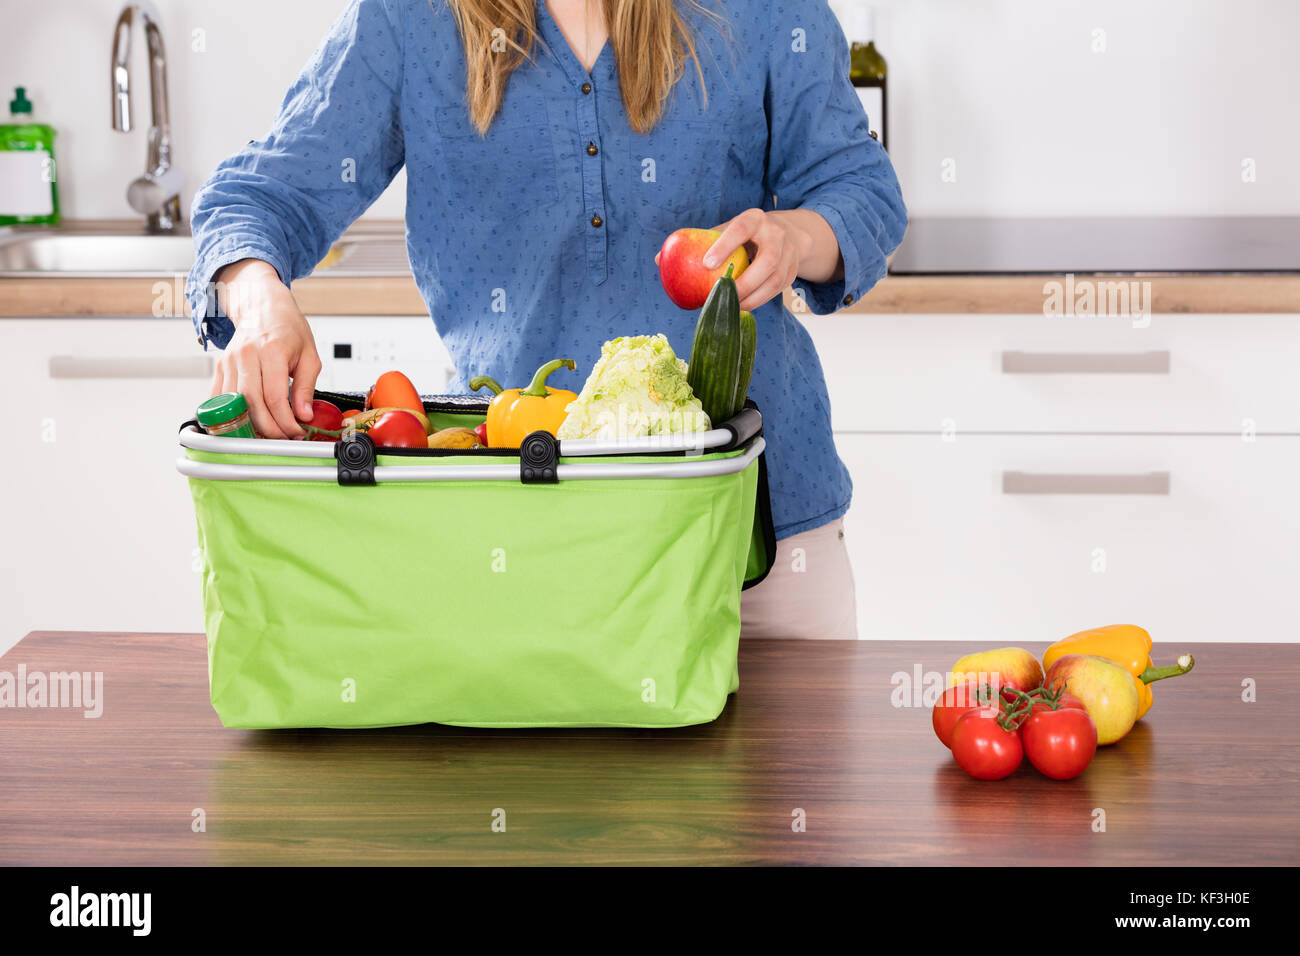 Close-up Of Woman Hand Removing Vegetable From Grocery Bag In Kitchen Stock Photo